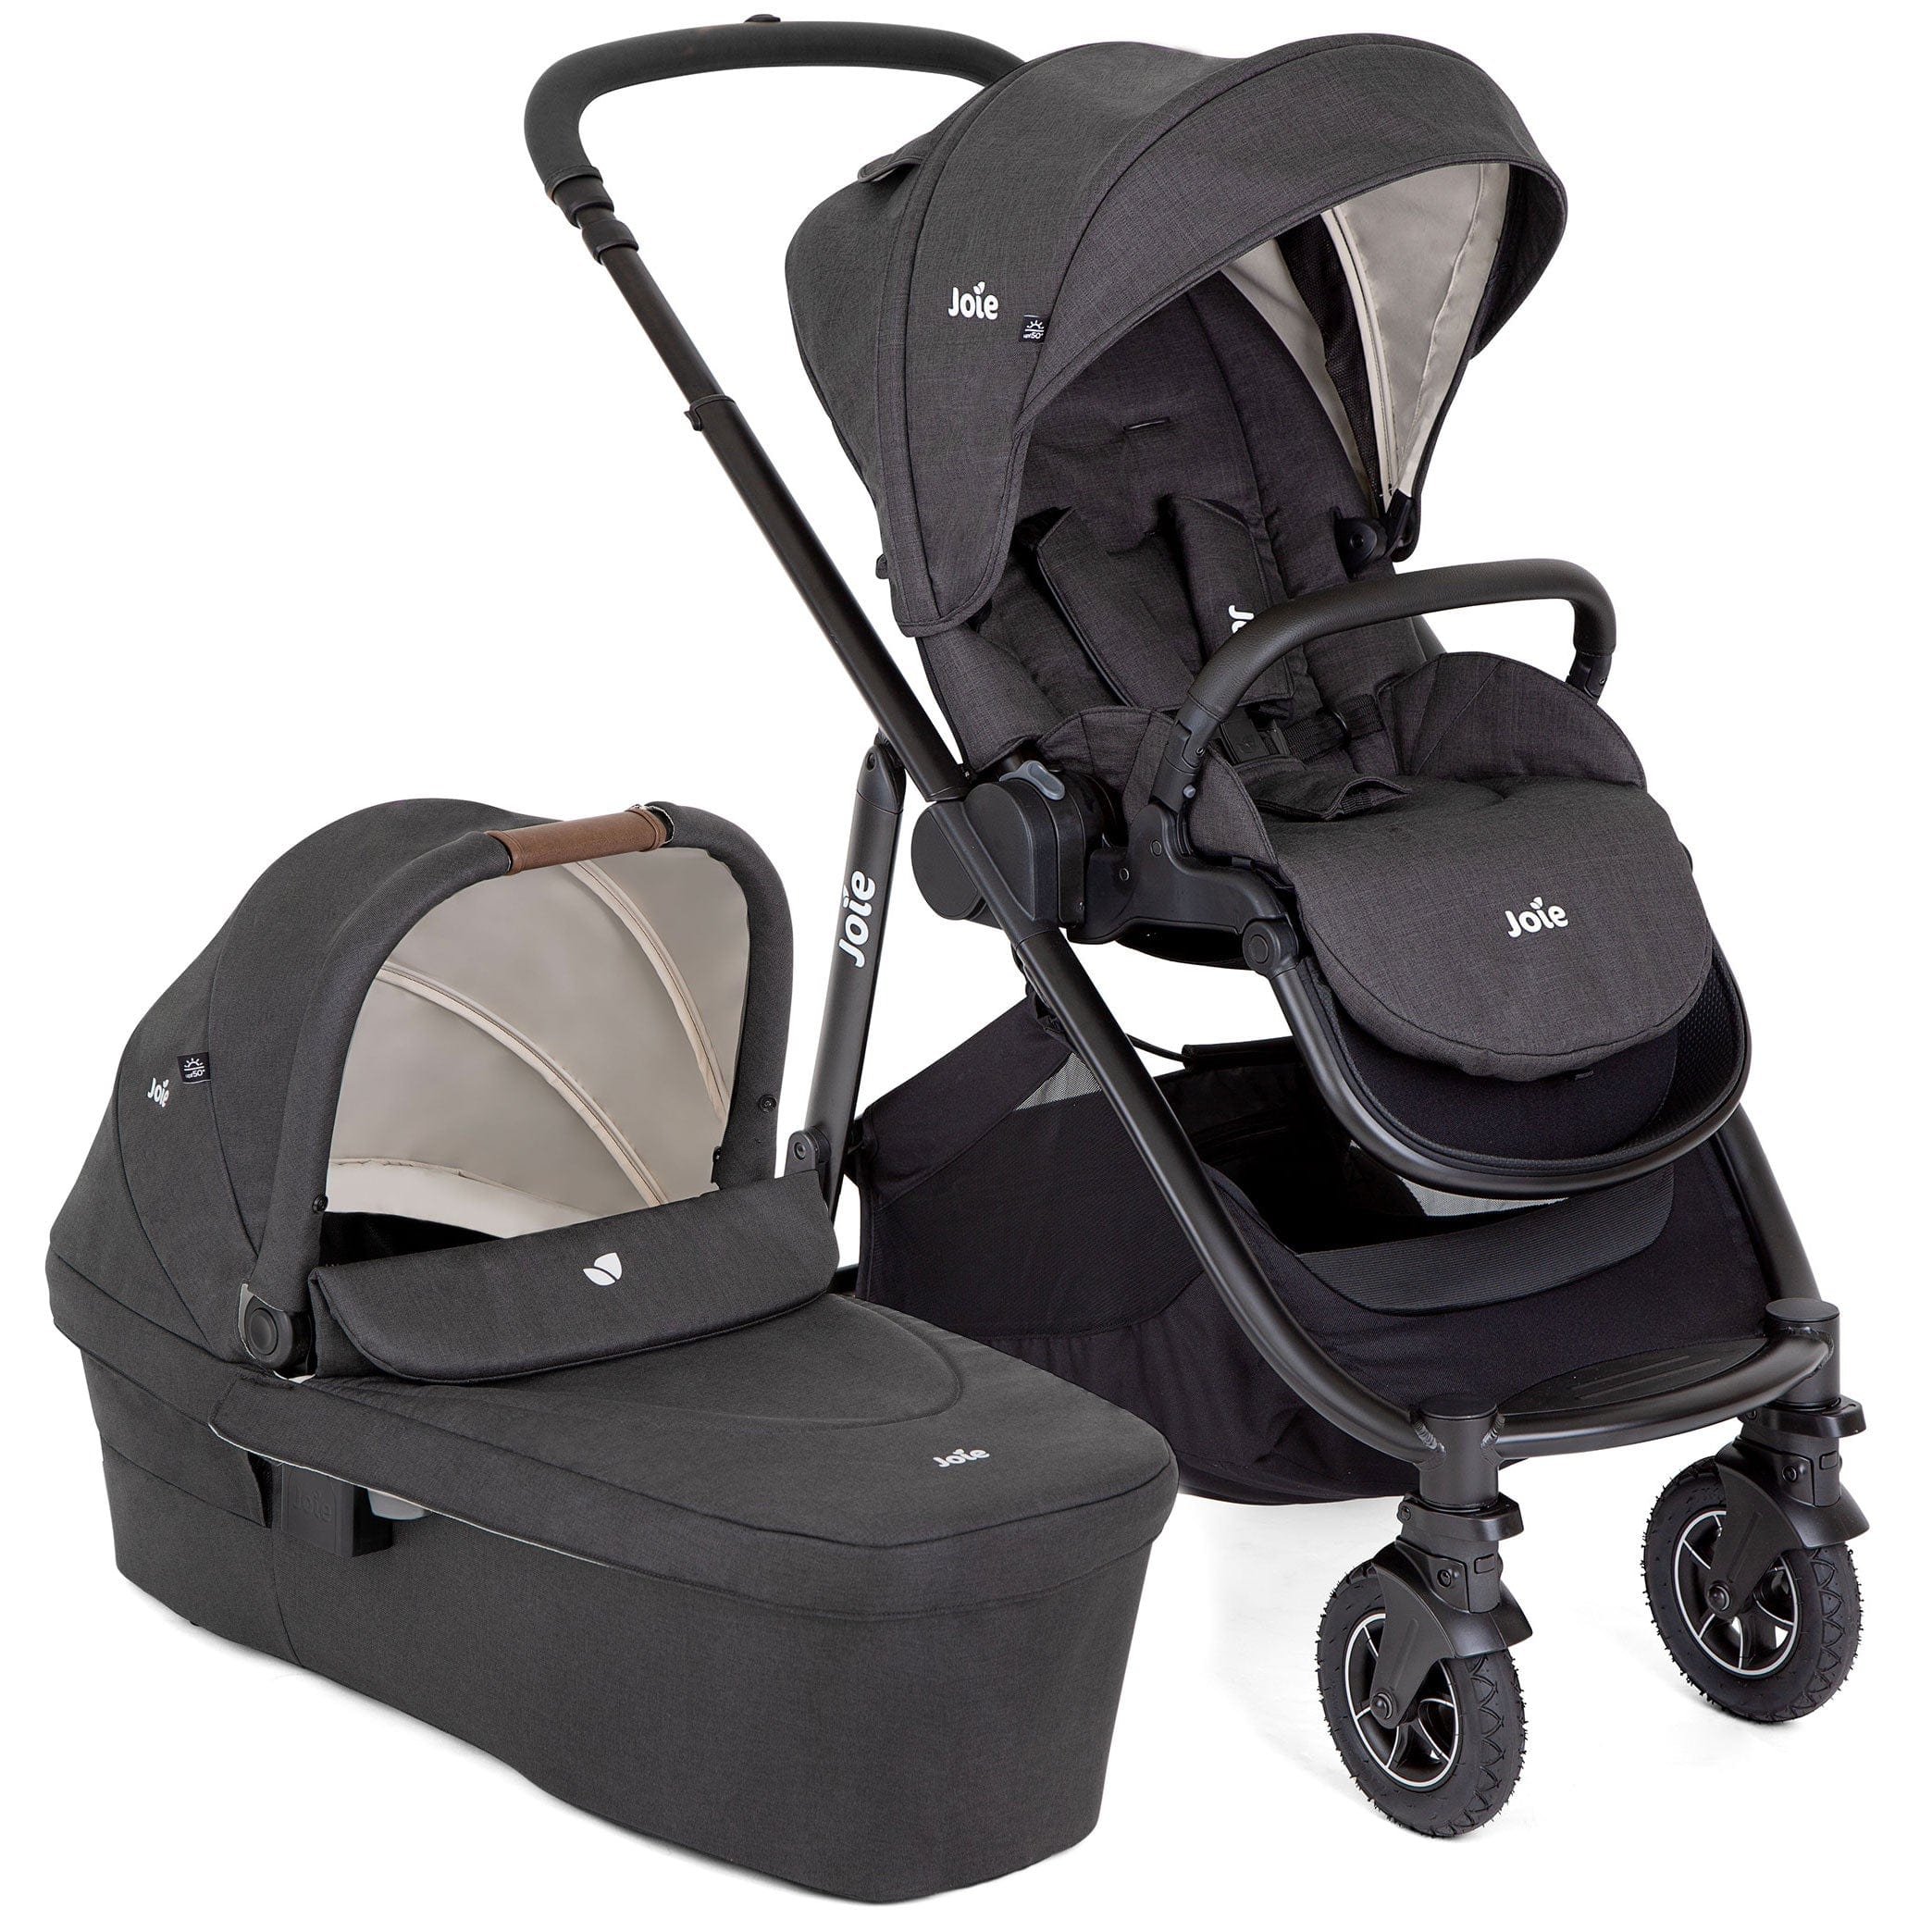 Joie Pushchairs & Buggies Joie Versatrax Stroller and Ramble XL Carrycot in Shale Z2BJVTRX1005UK